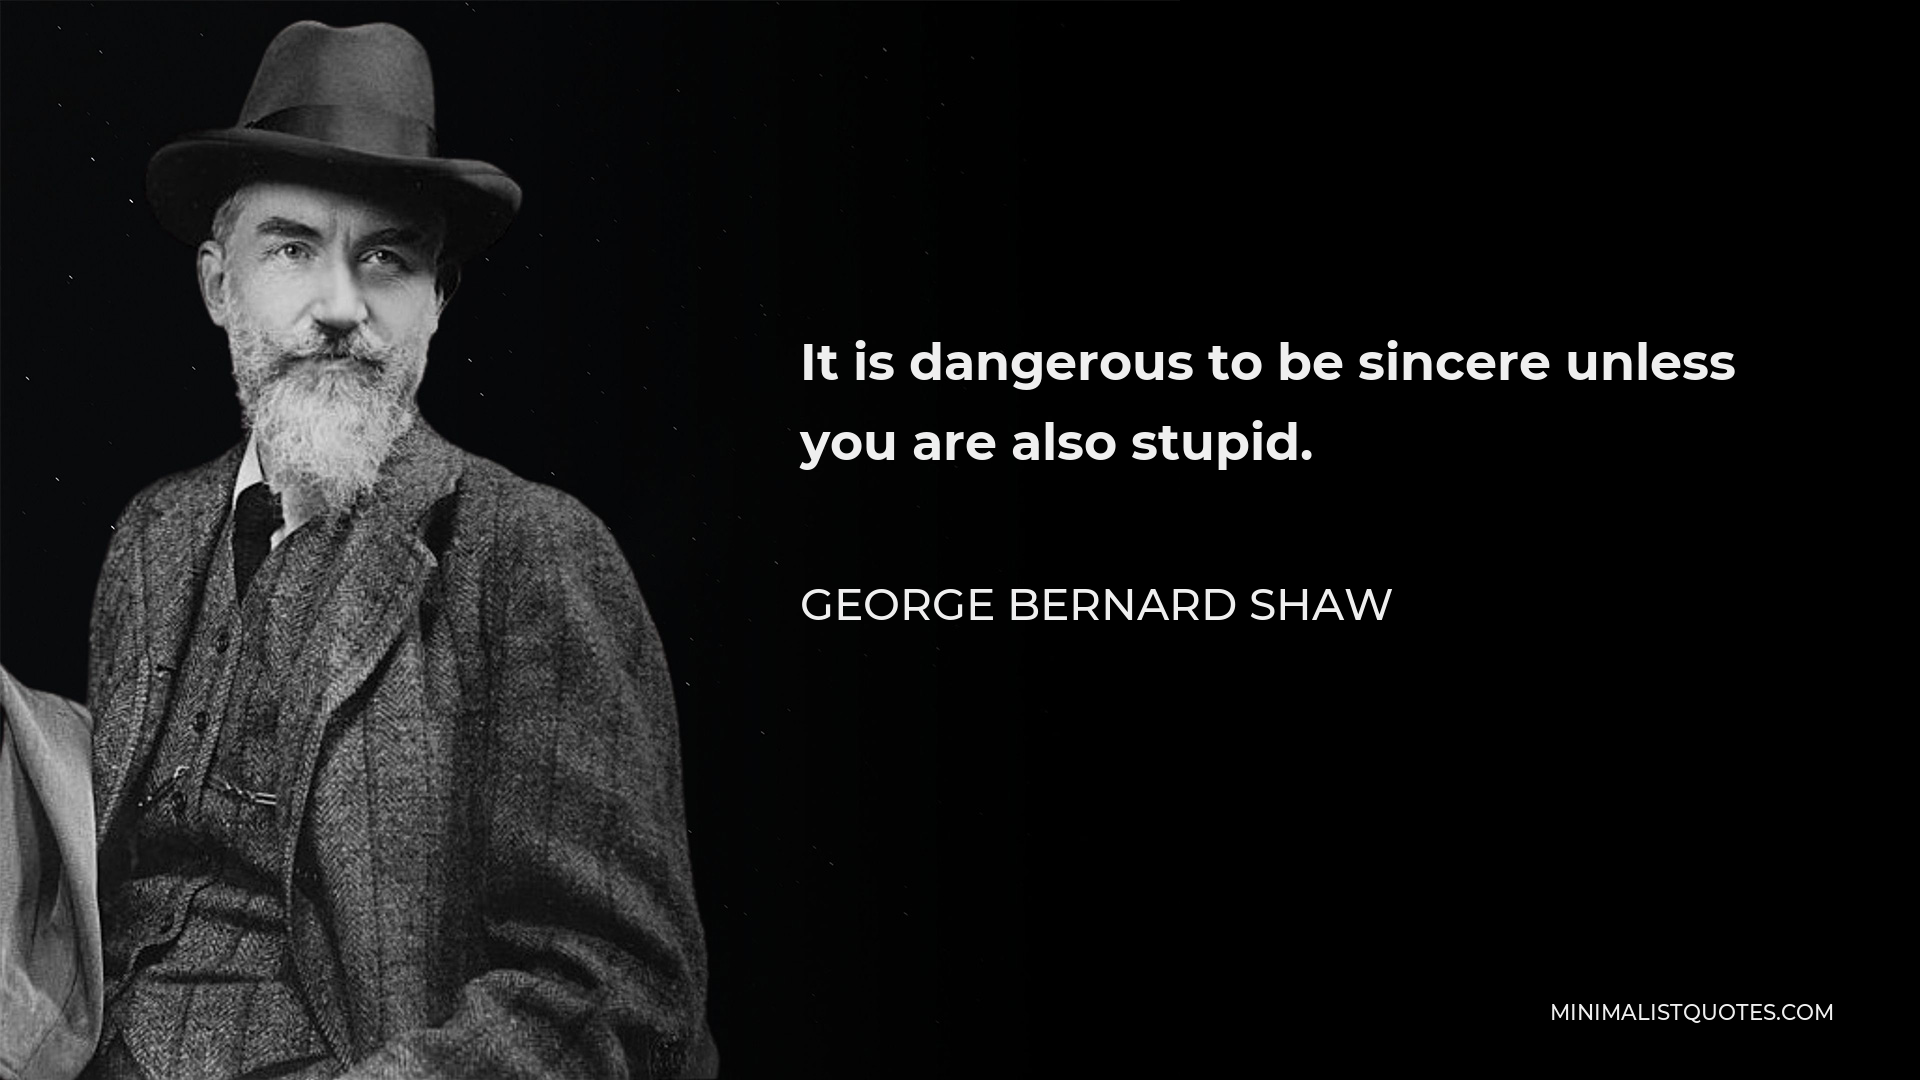 George Bernard Shaw Quote - It is dangerous to be sincere unless you are also stupid.